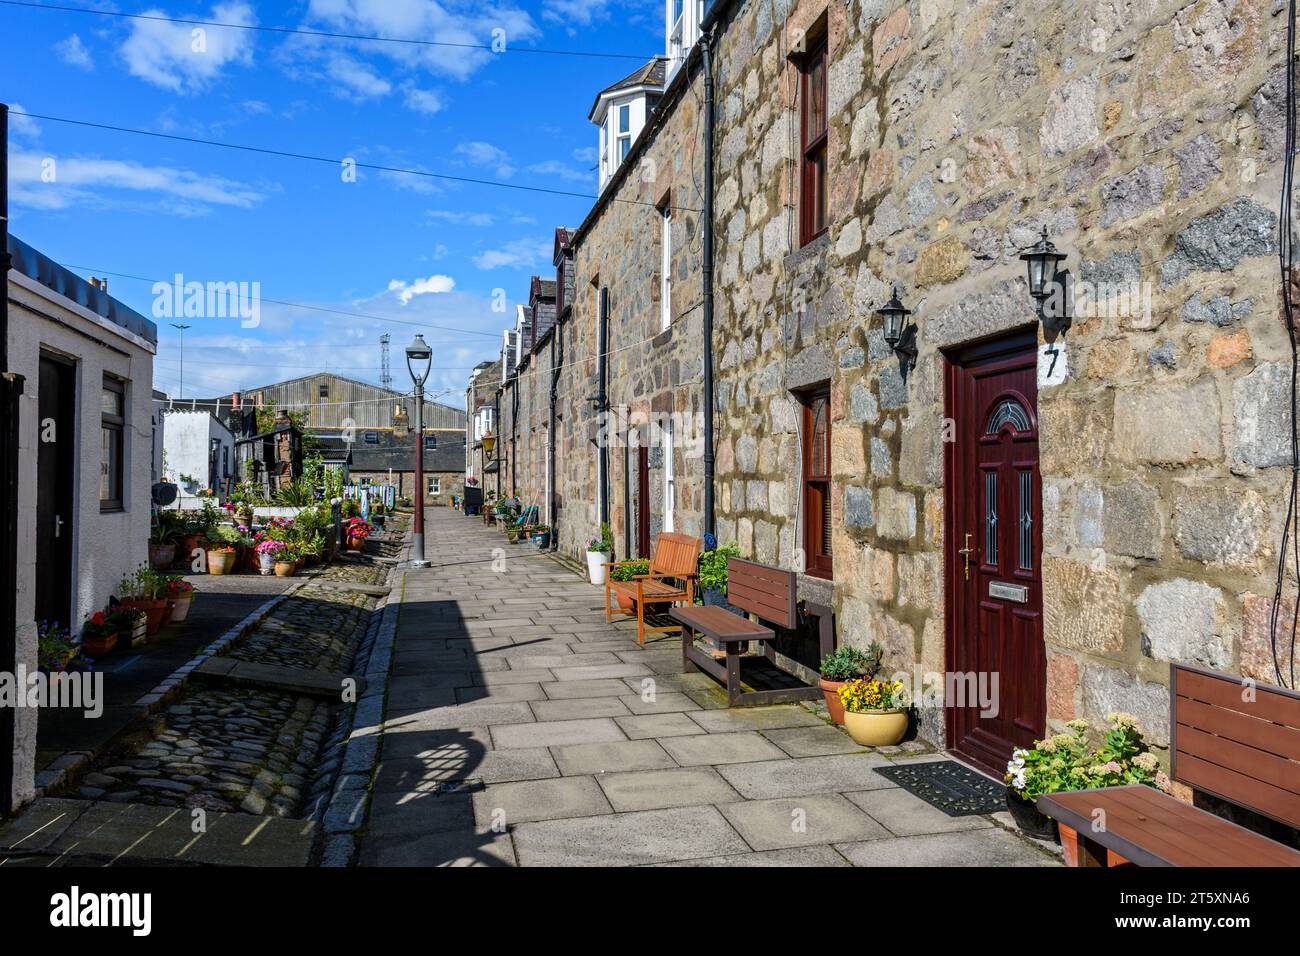 A street in the historic former fishing village of Footdee, The dwellings are laid out in squares with their backs to the sea.  Aberdeen, Scotland, UK Stock Photo